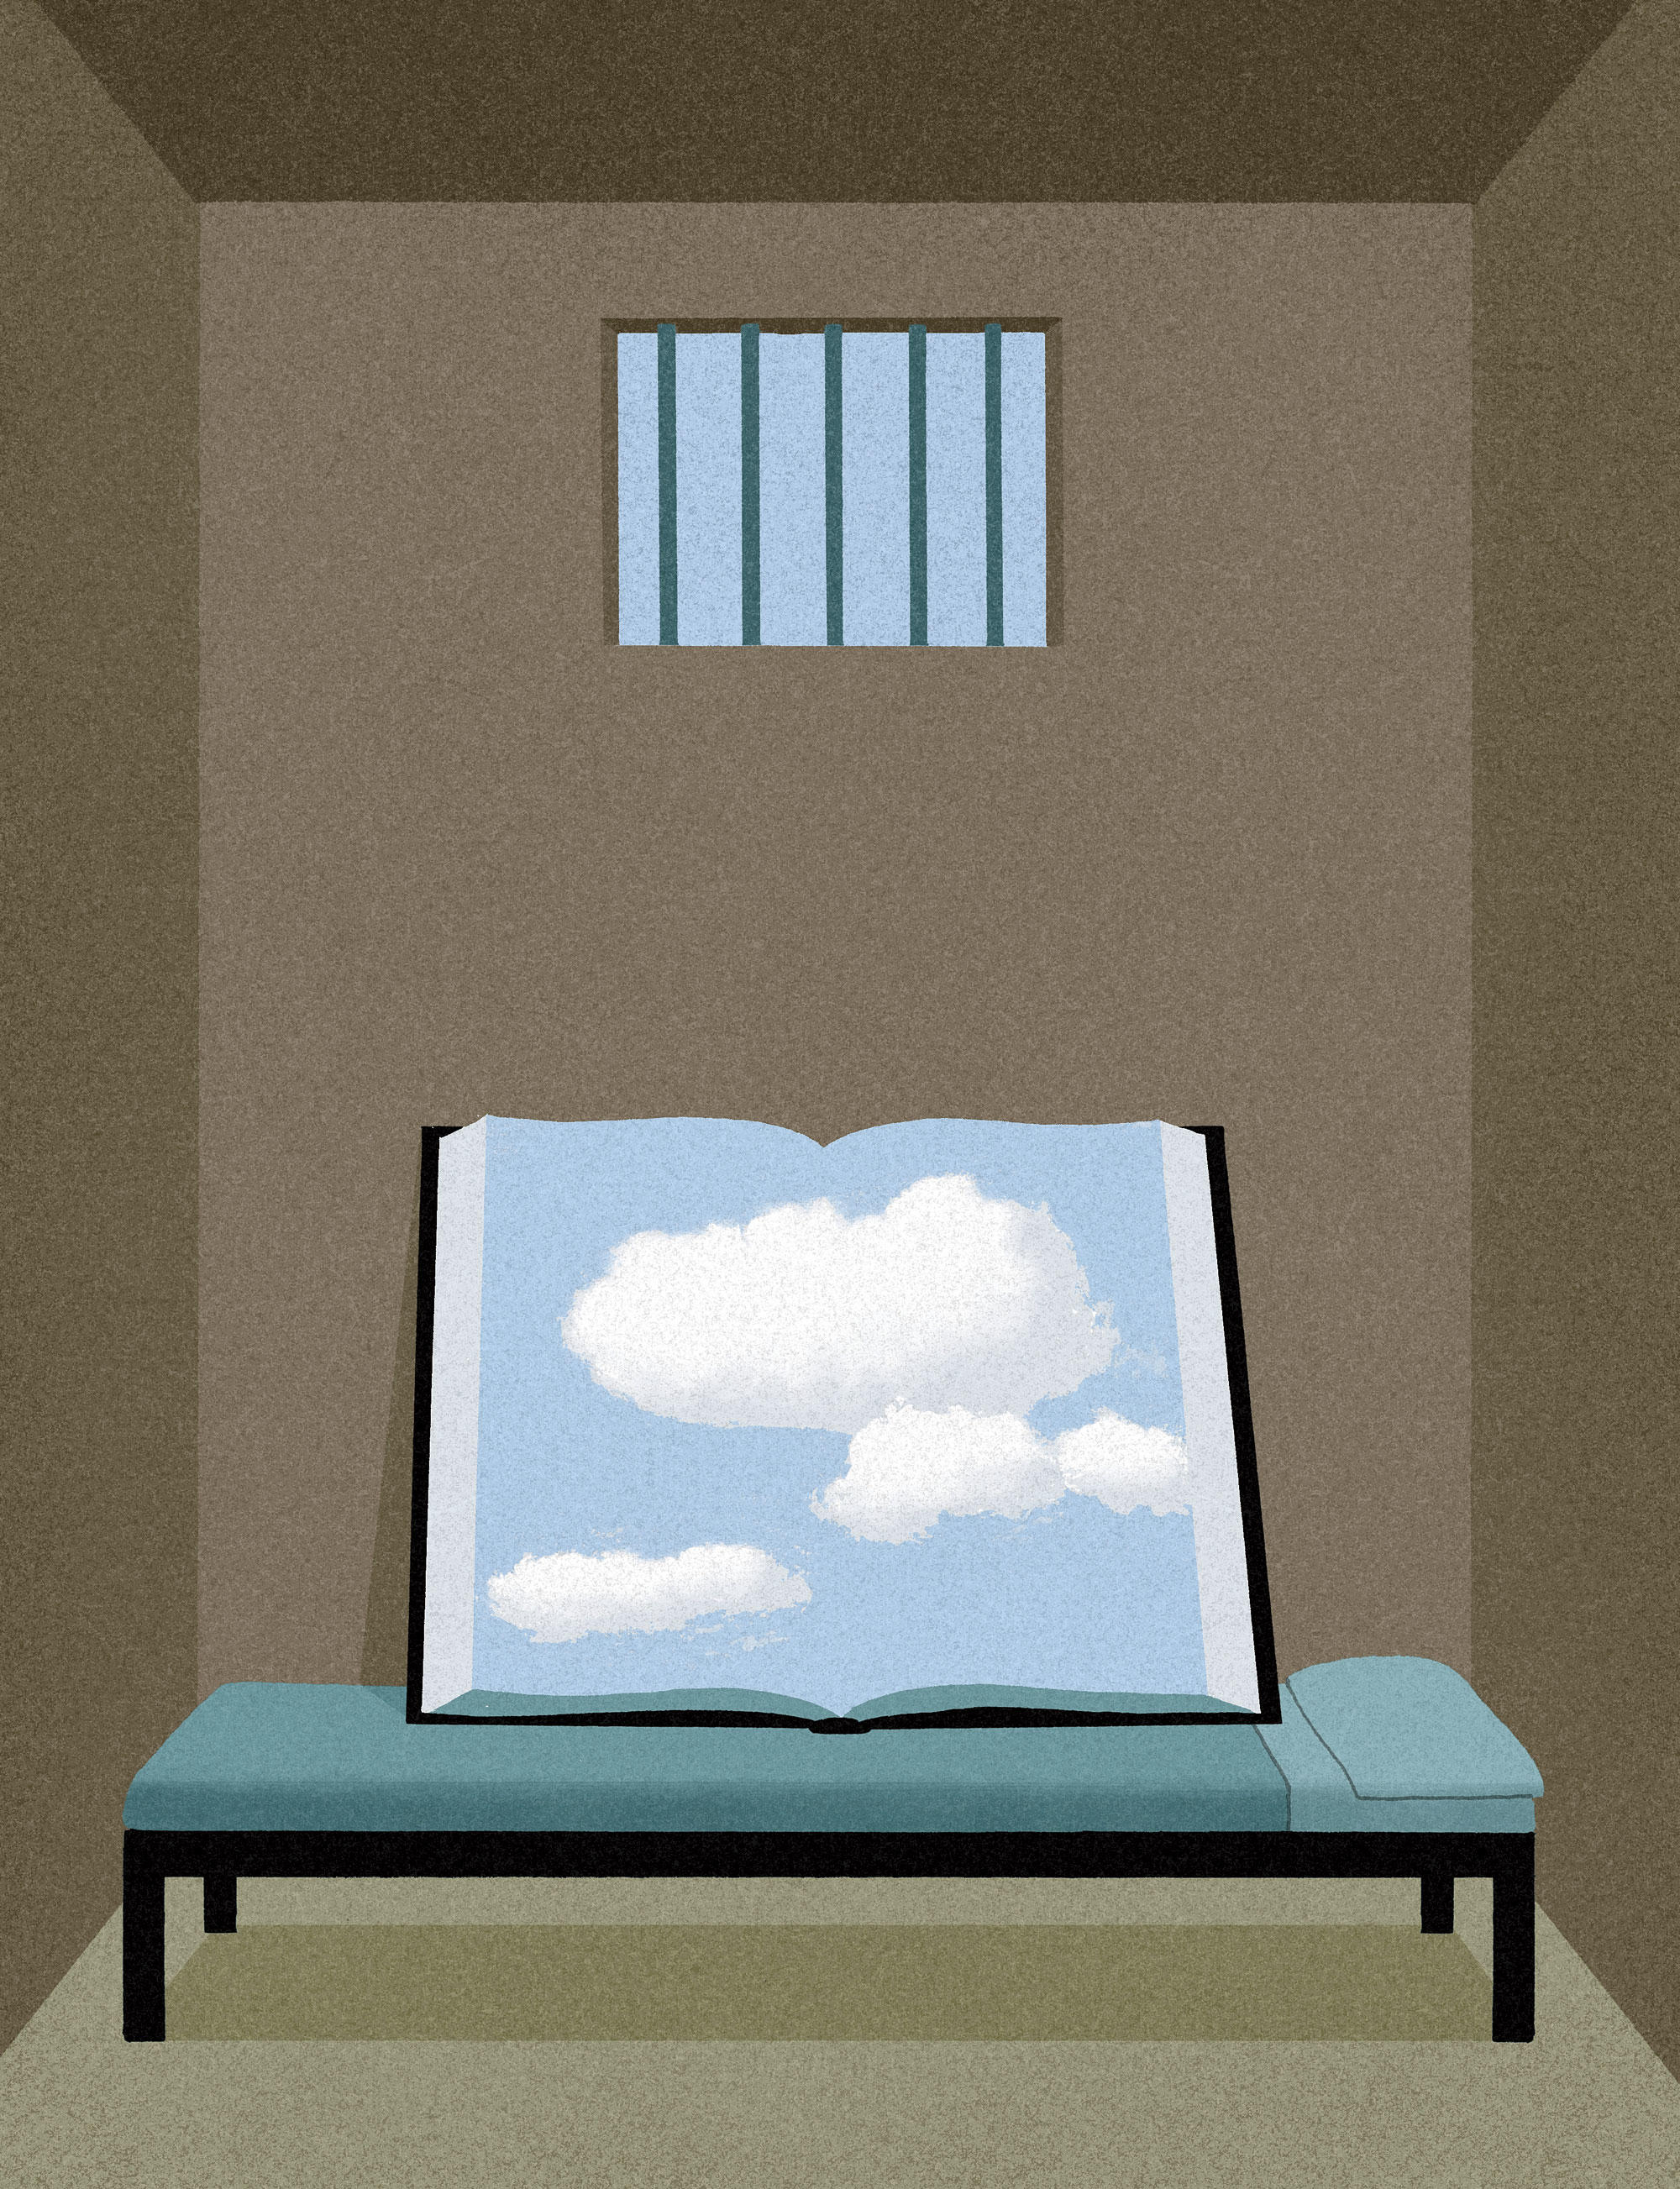 Illustration of book in prison cell